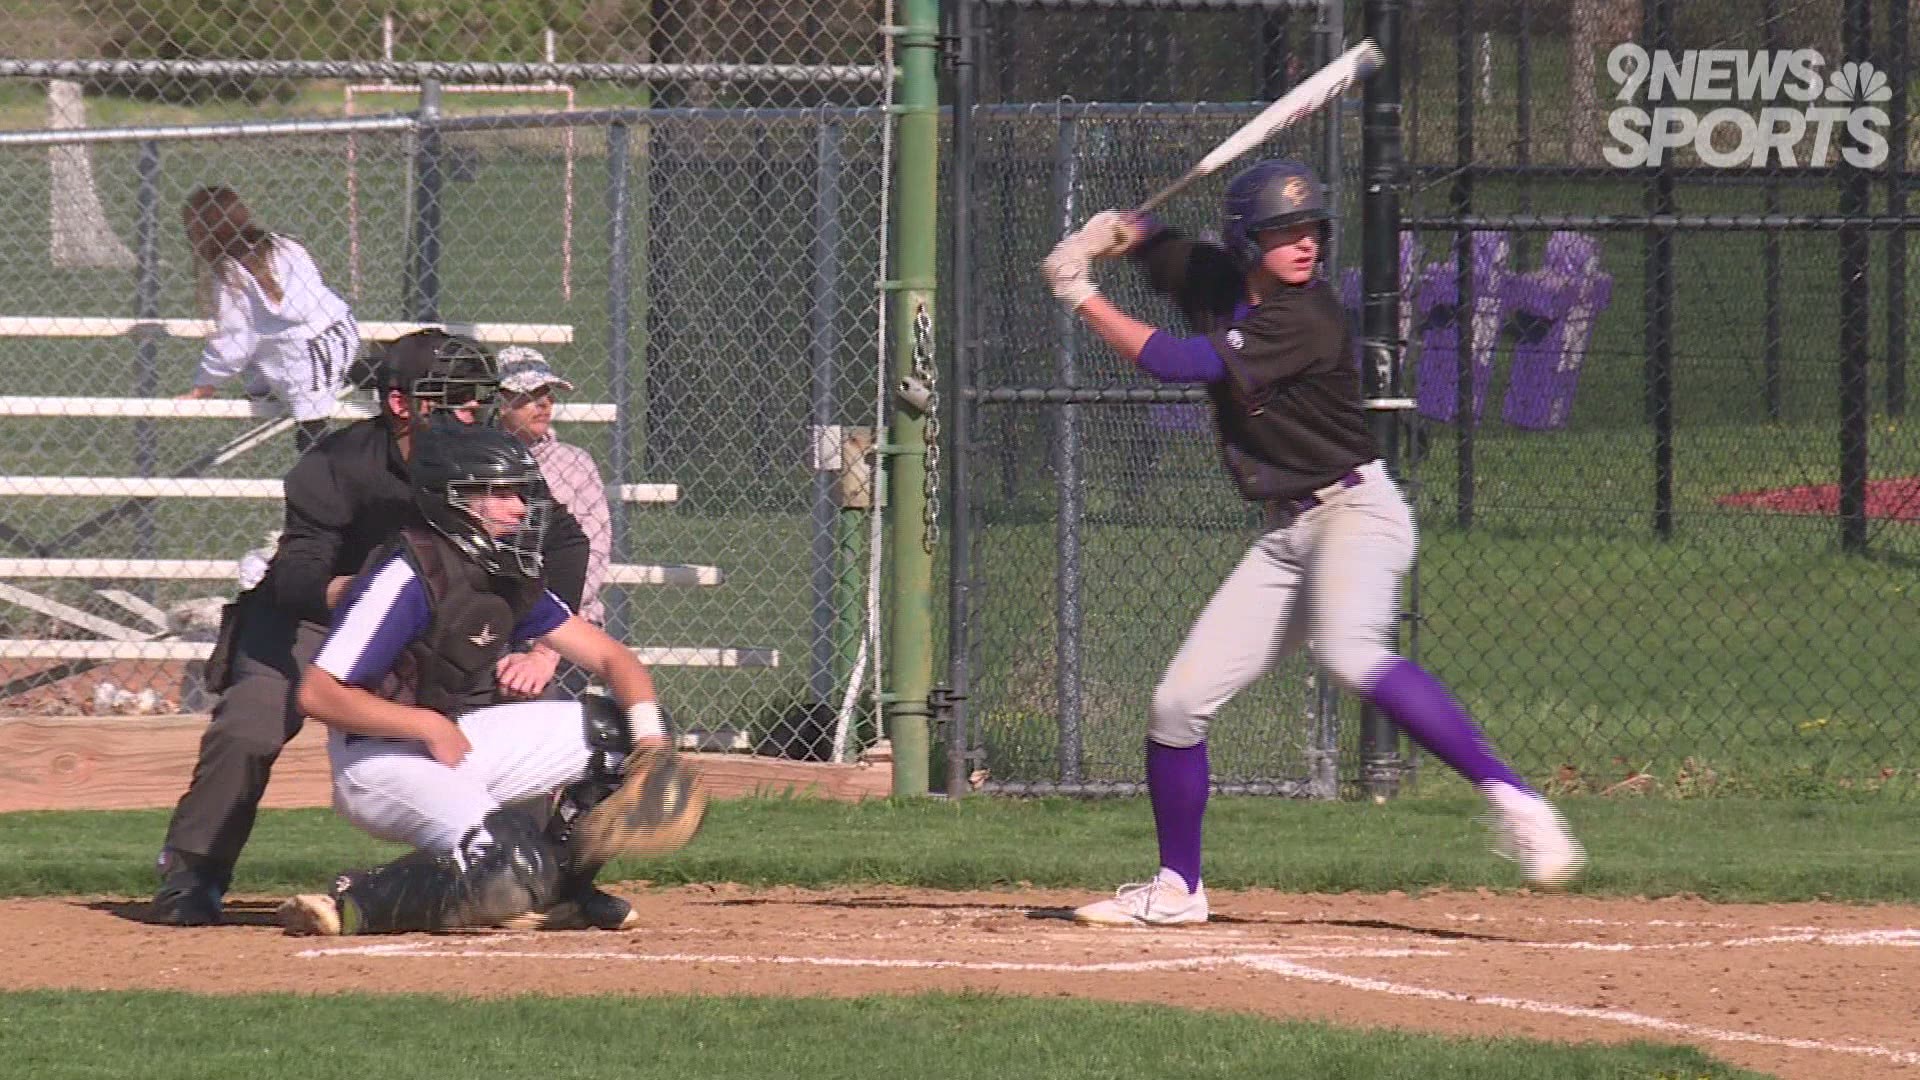 The Lambkins have scored 21 runs in two games.